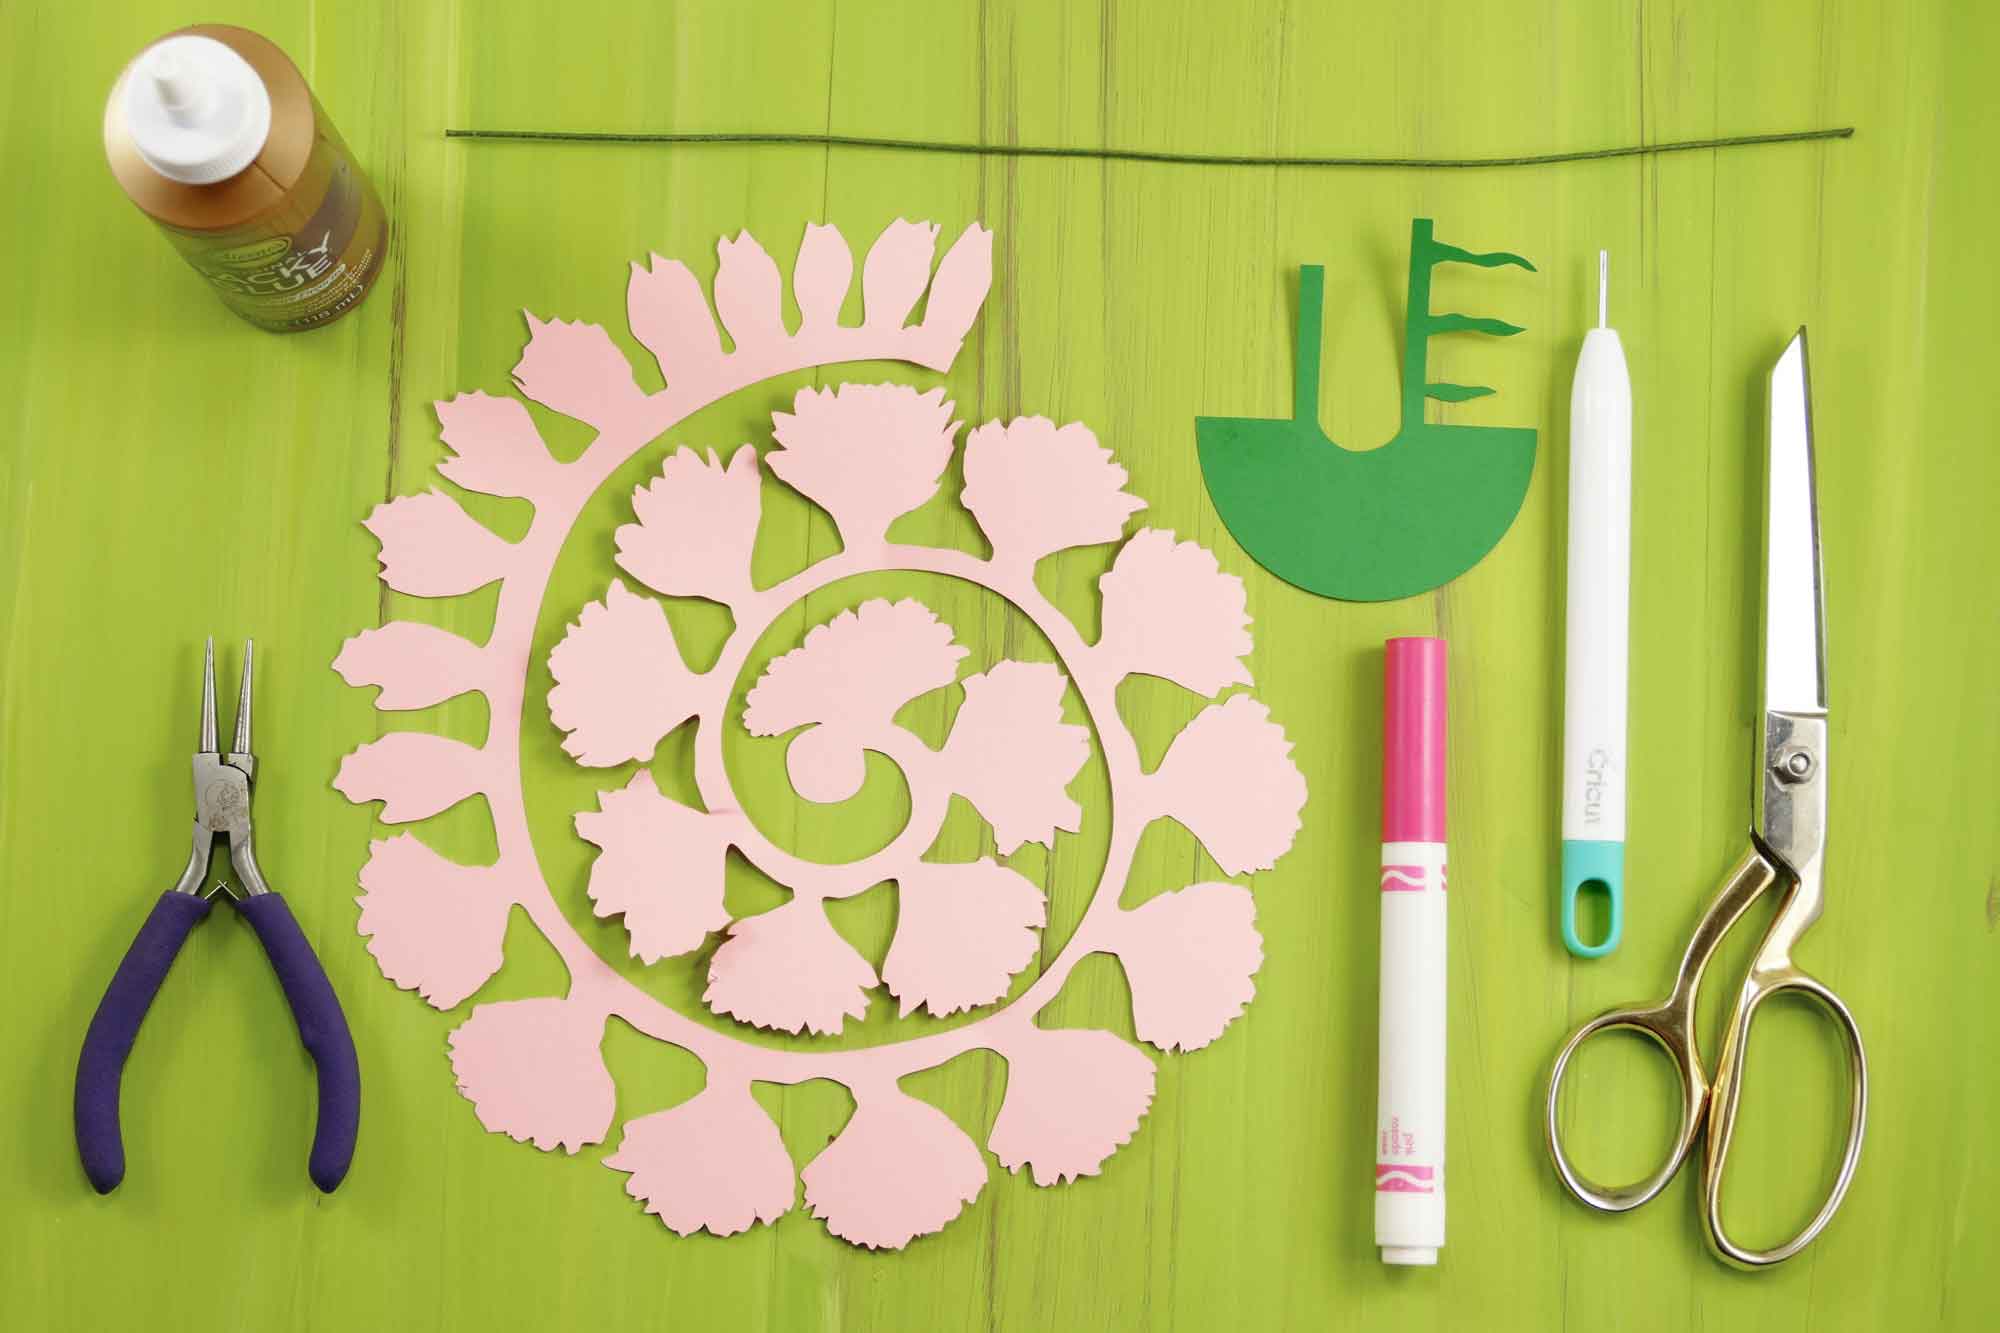 Download Rolled Paper Carnation Tutorial - Free SVG Files ...